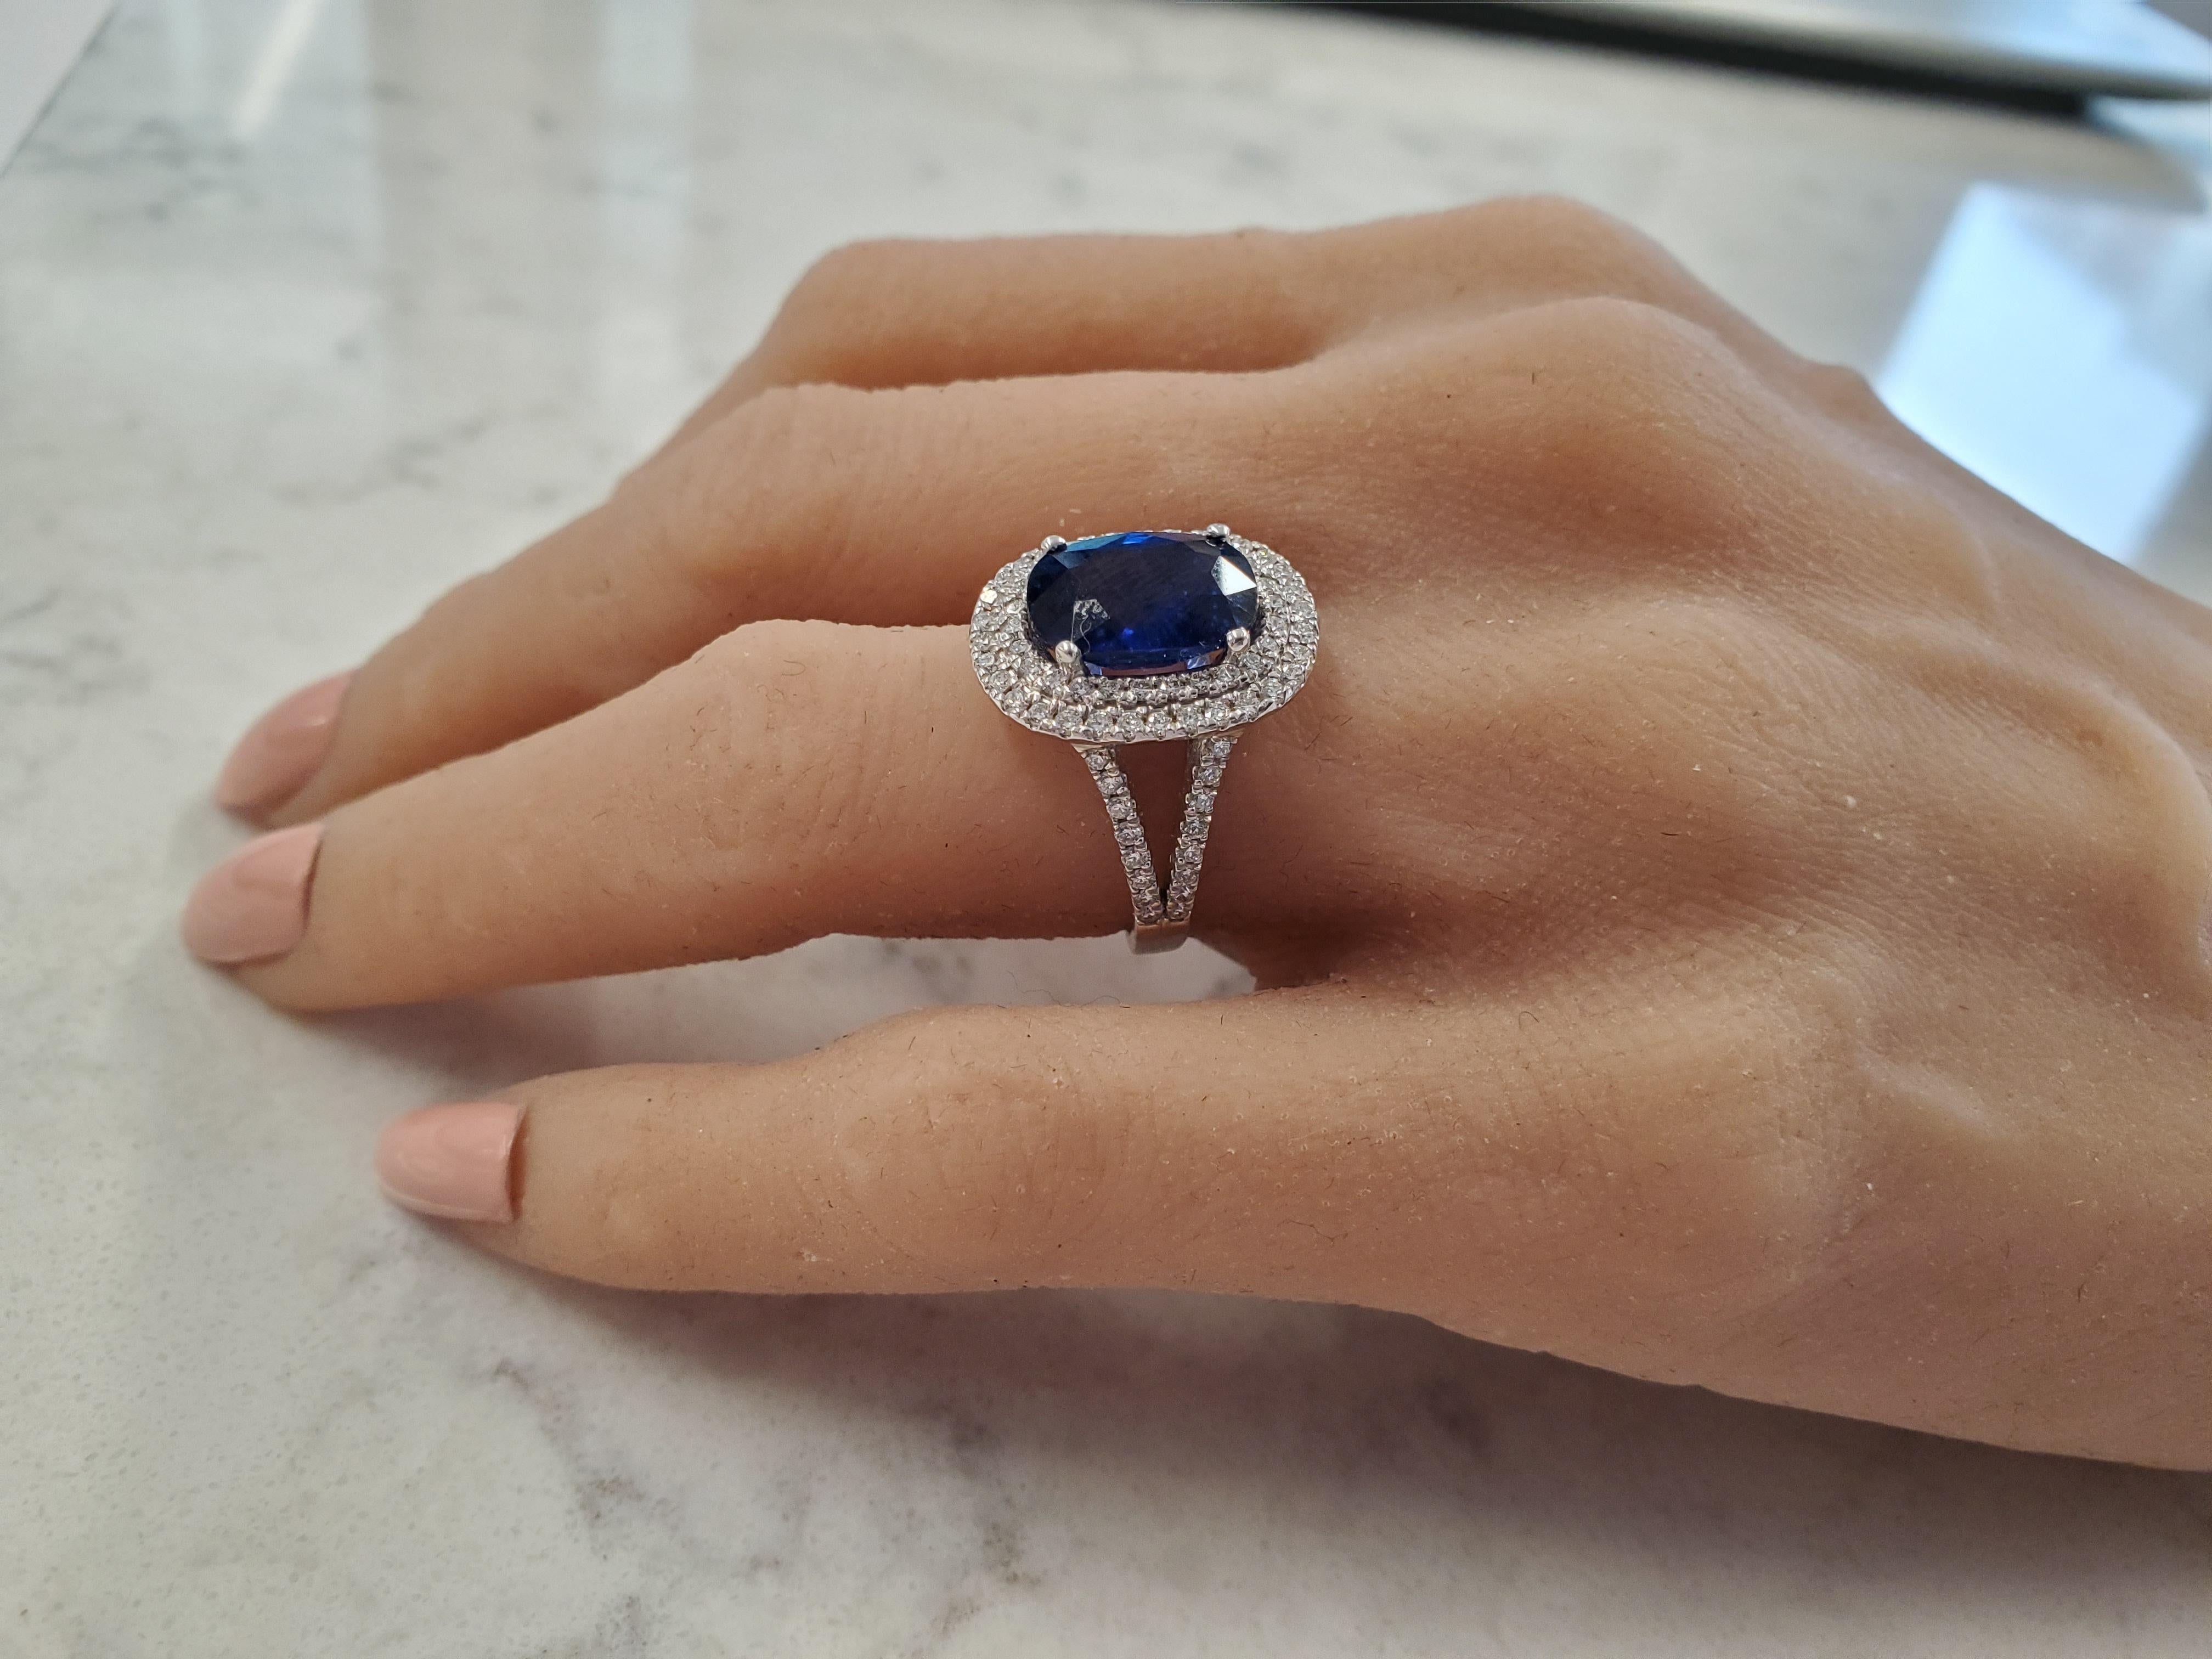 This opulent halo ring features a 4.49 carat cushion cut prong set blue sapphire that measures 11.62x8.27mm. The gem source is Sri Lanka; its color is royal blue, with excellent transparency and luster. This sapphire is surrounded by a double-decker